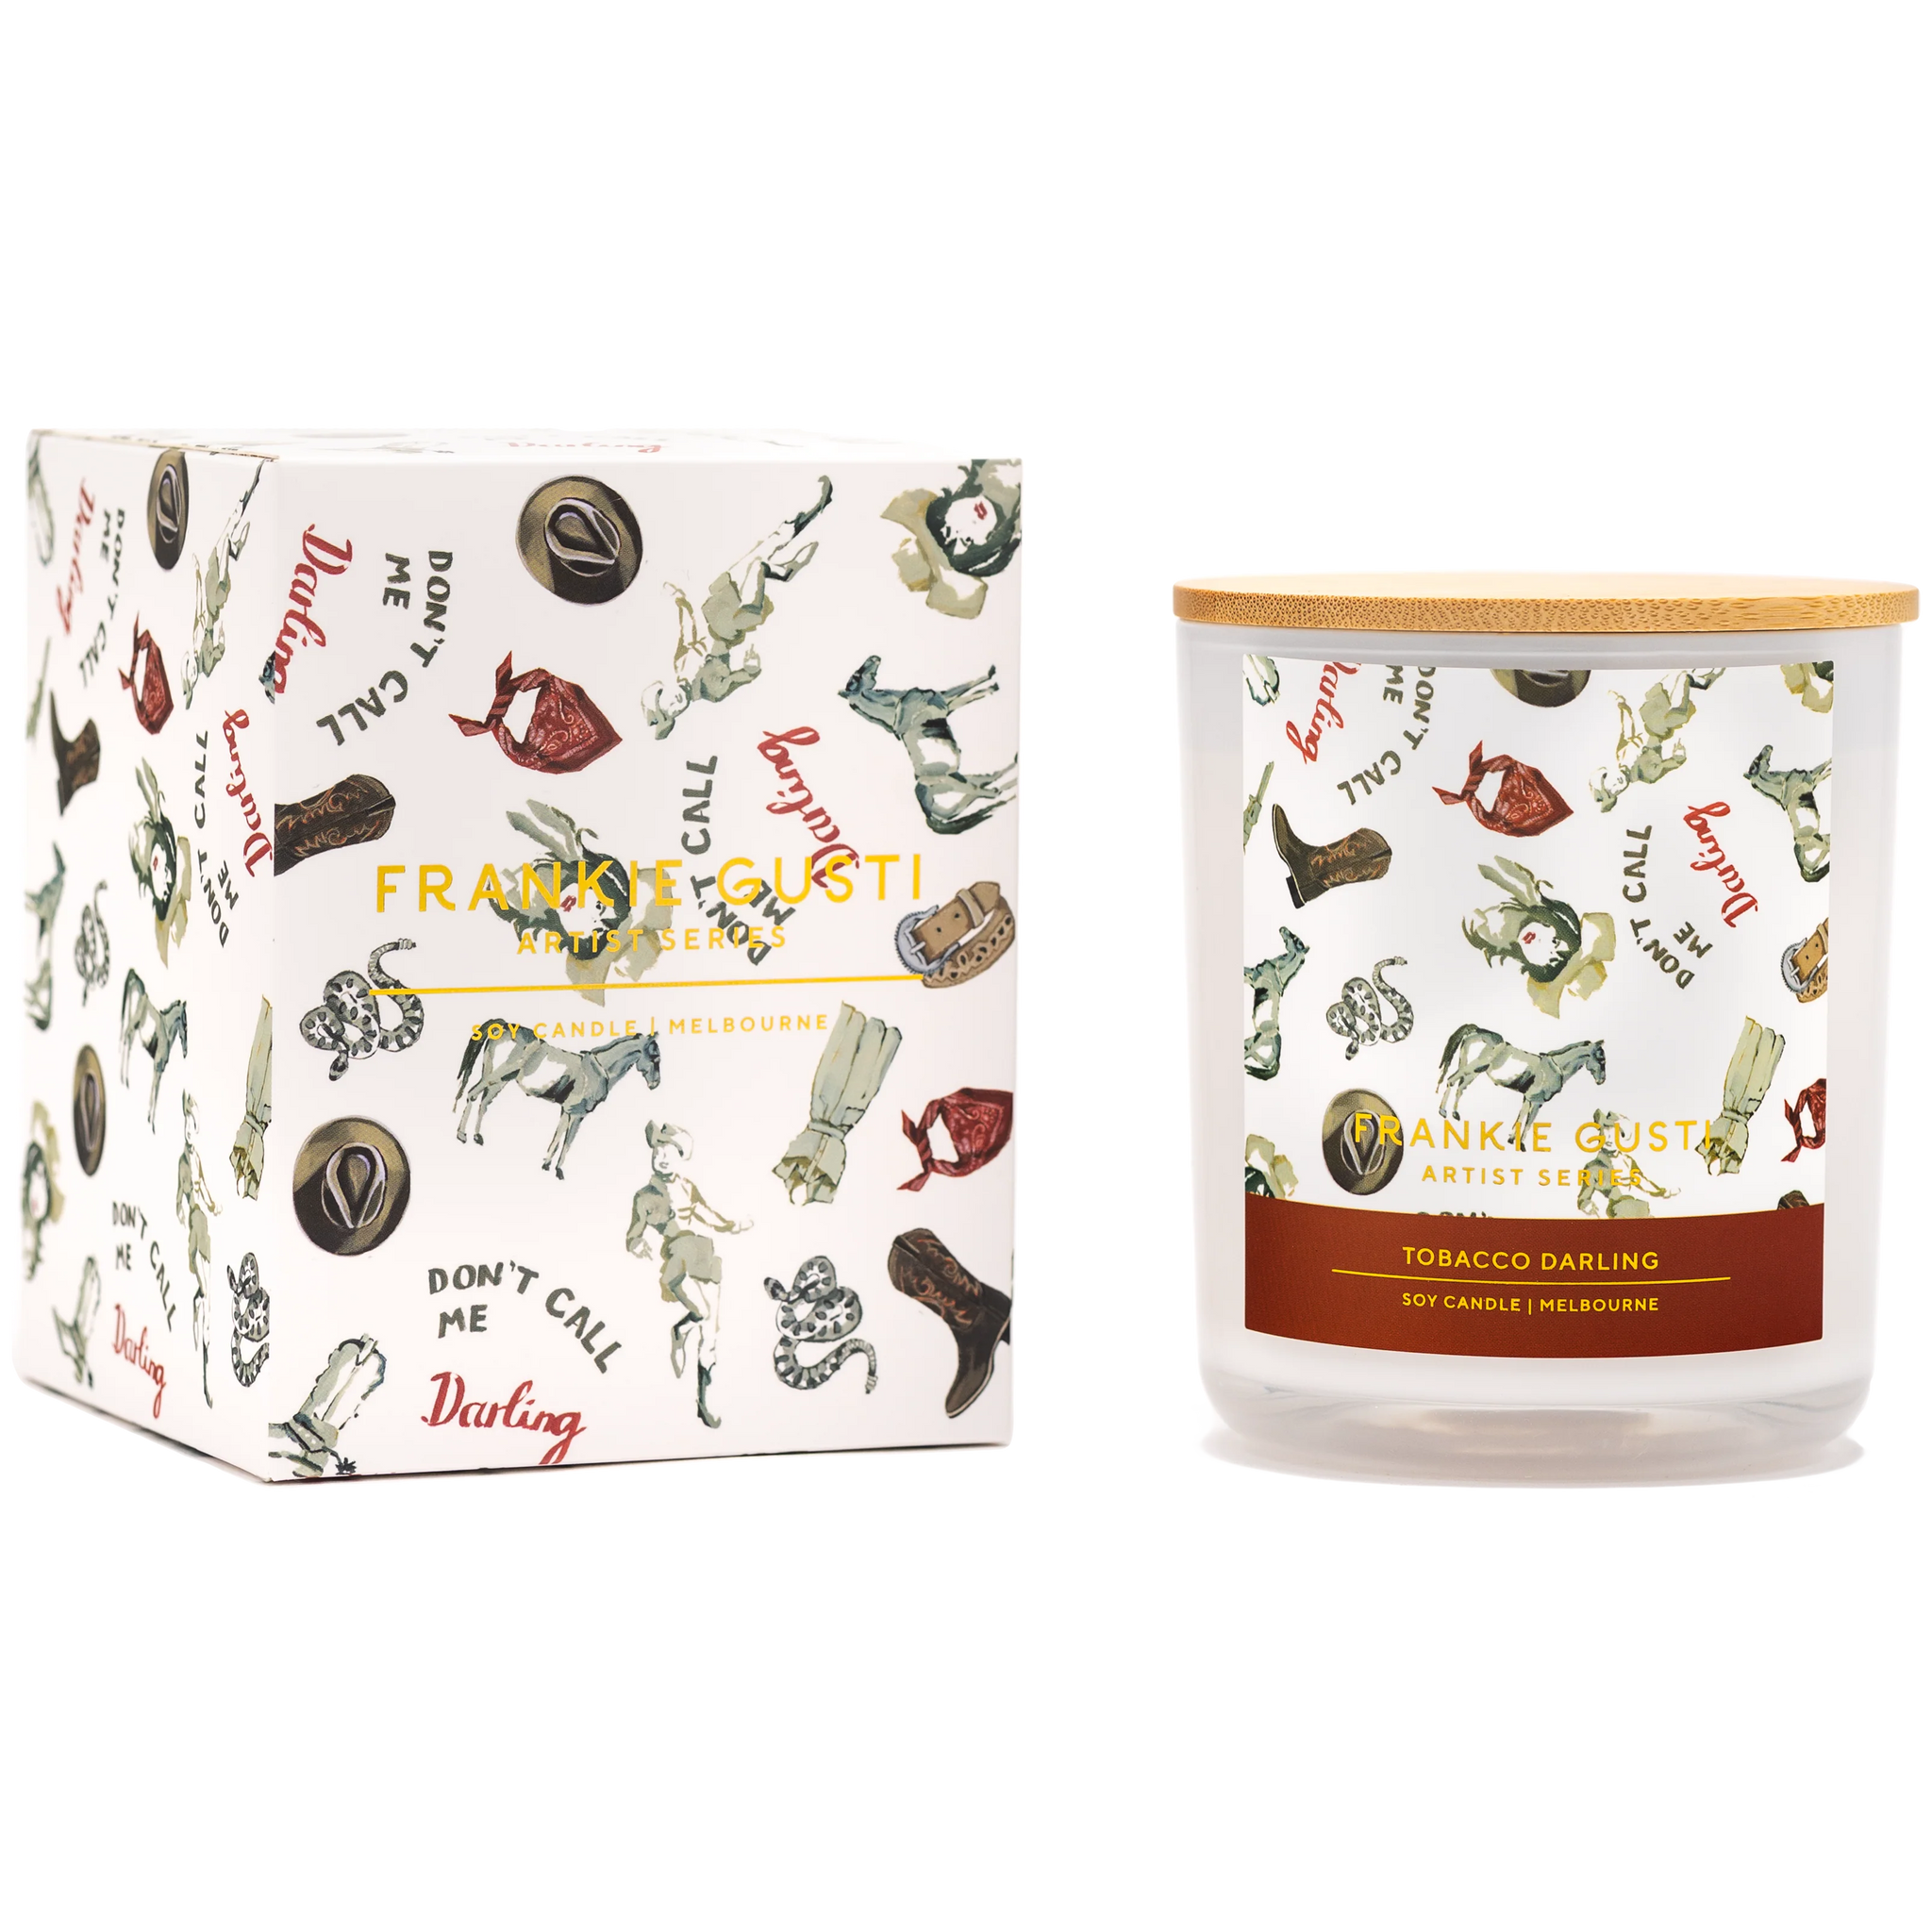 Tobacco Darling Whitney Spicer Candle